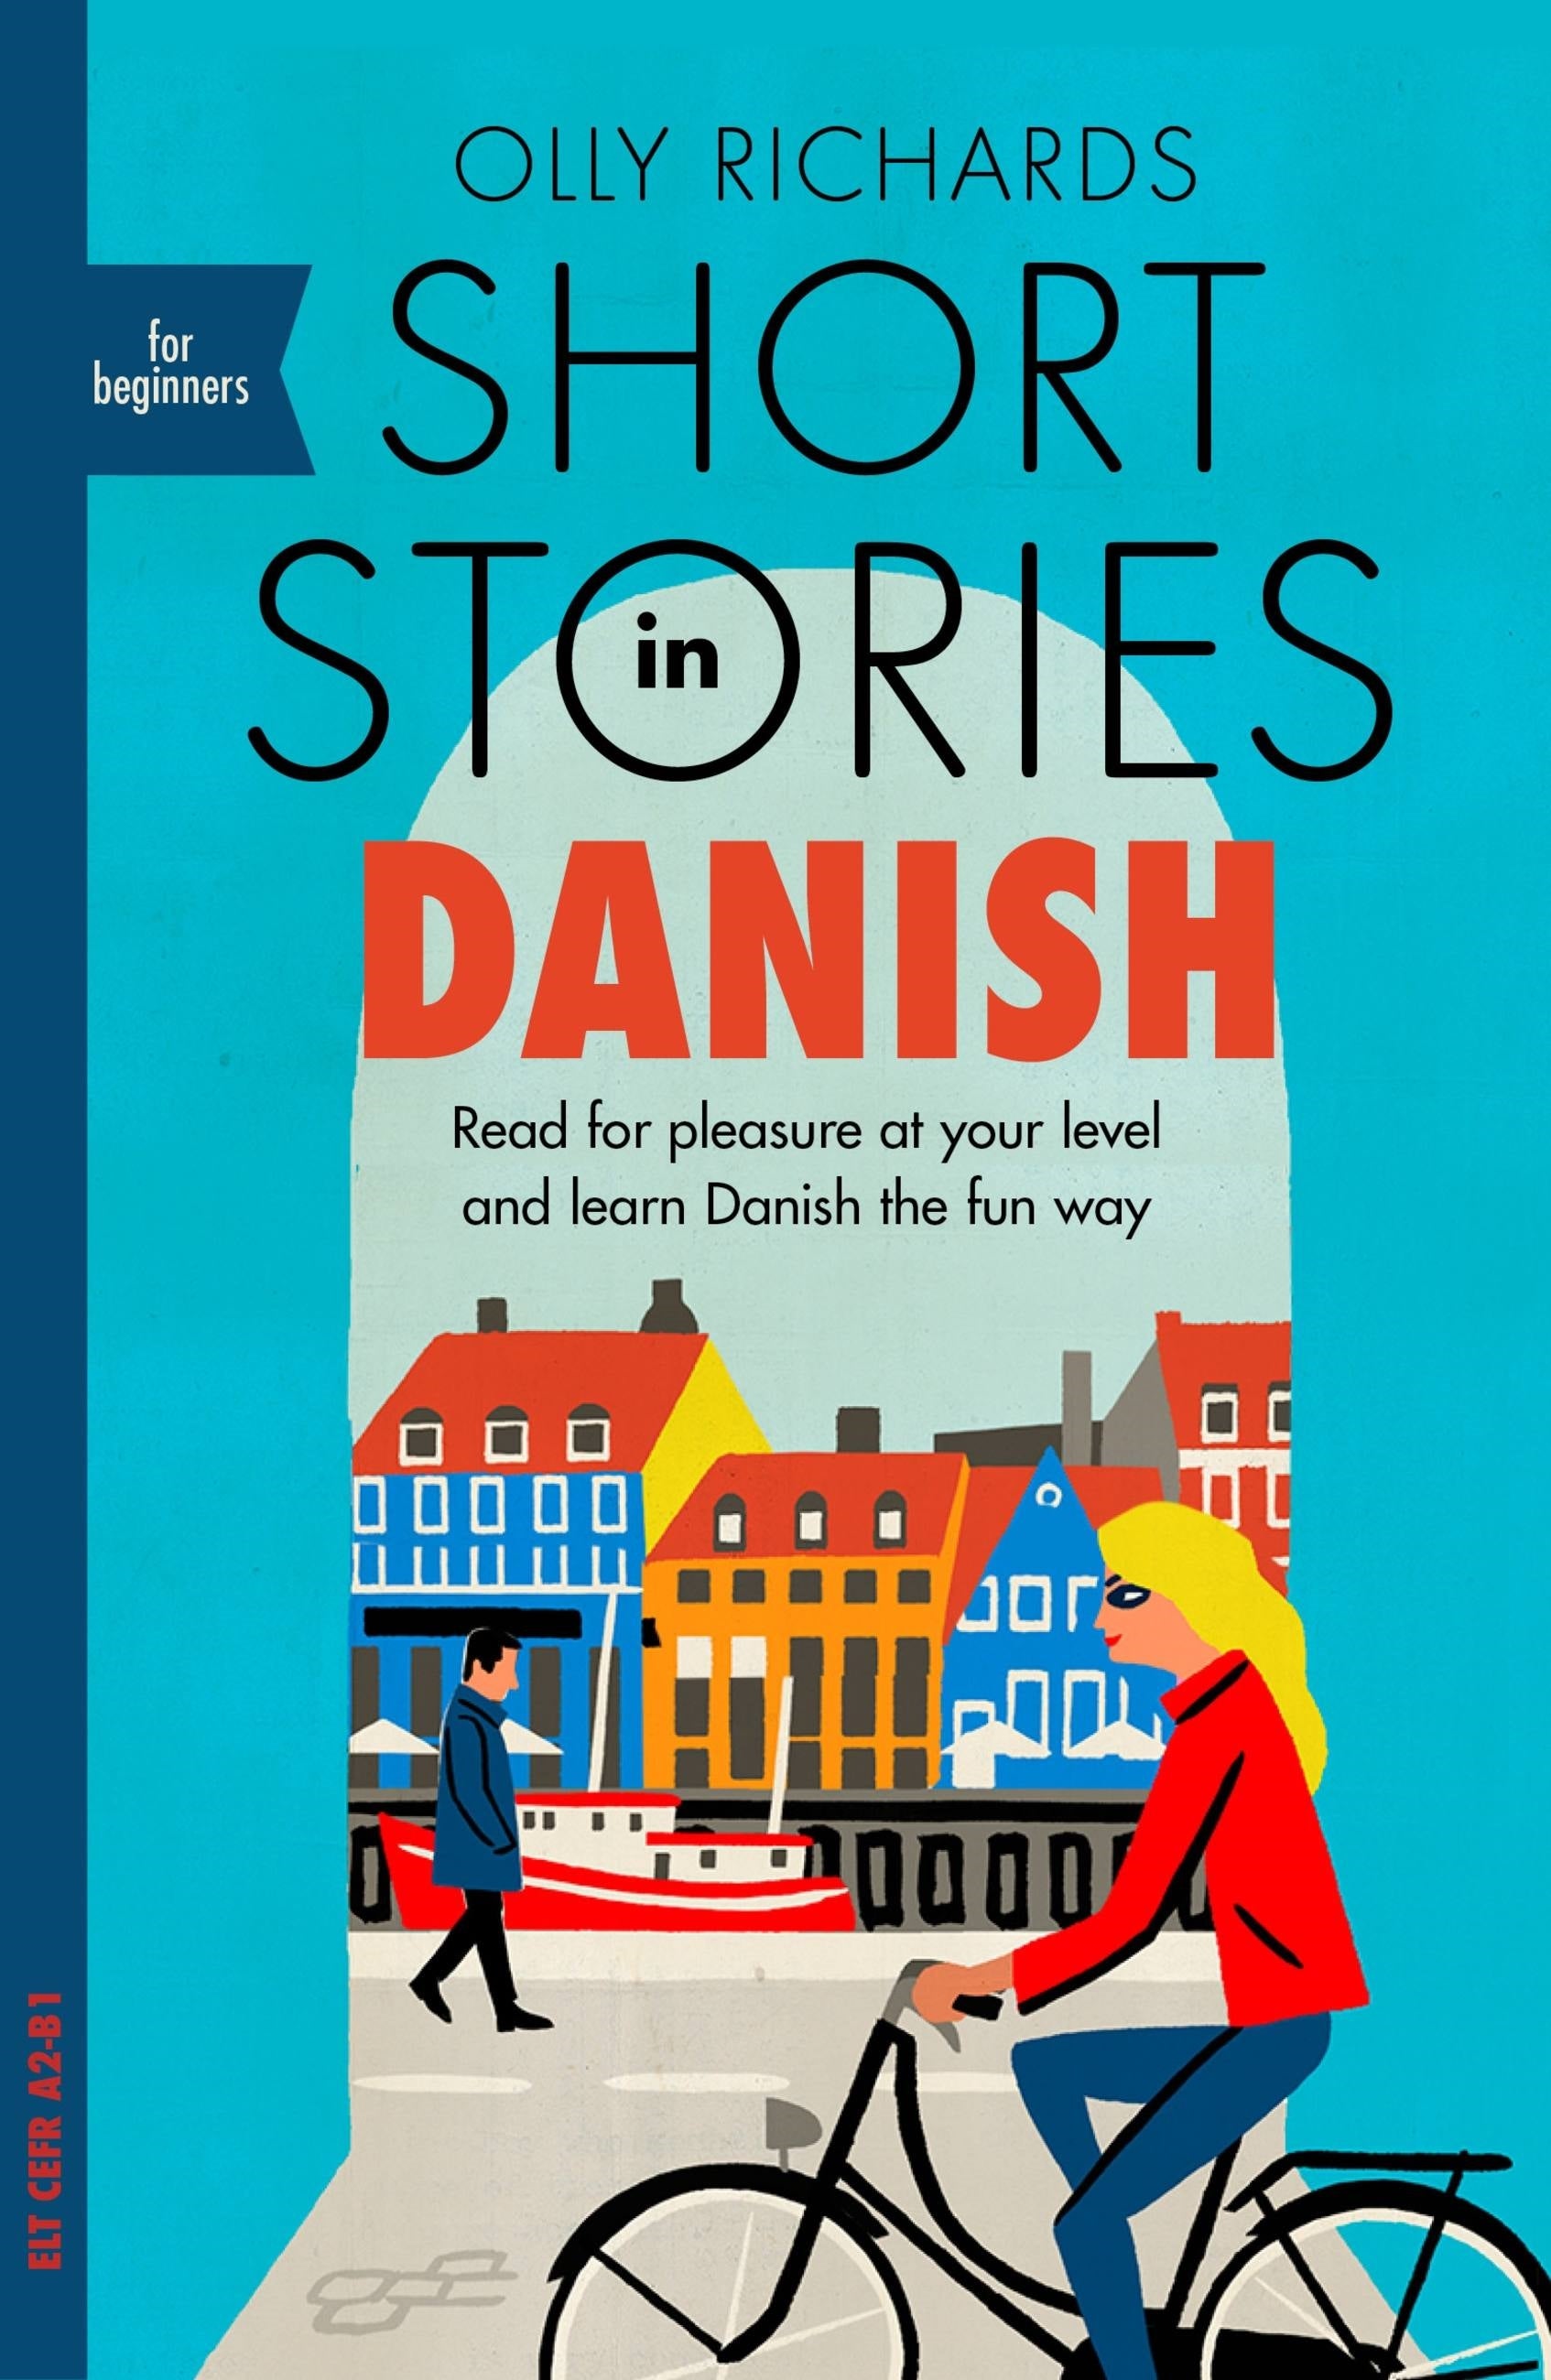 Short Stories in Danish for Beginners by Olly Richards